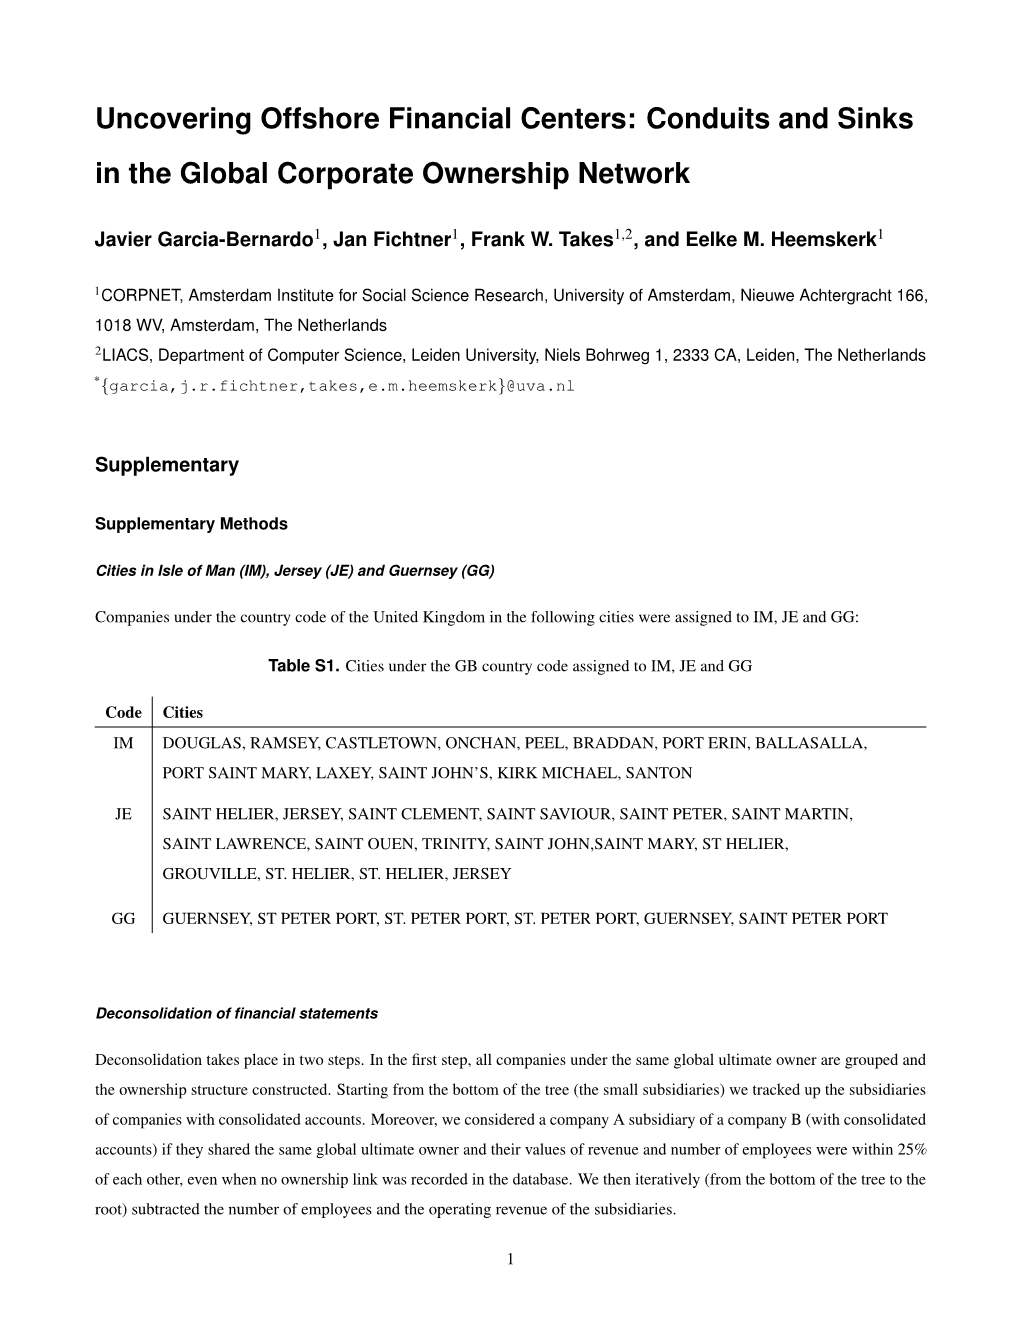 Conduits and Sinks in the Global Corporate Ownership Network